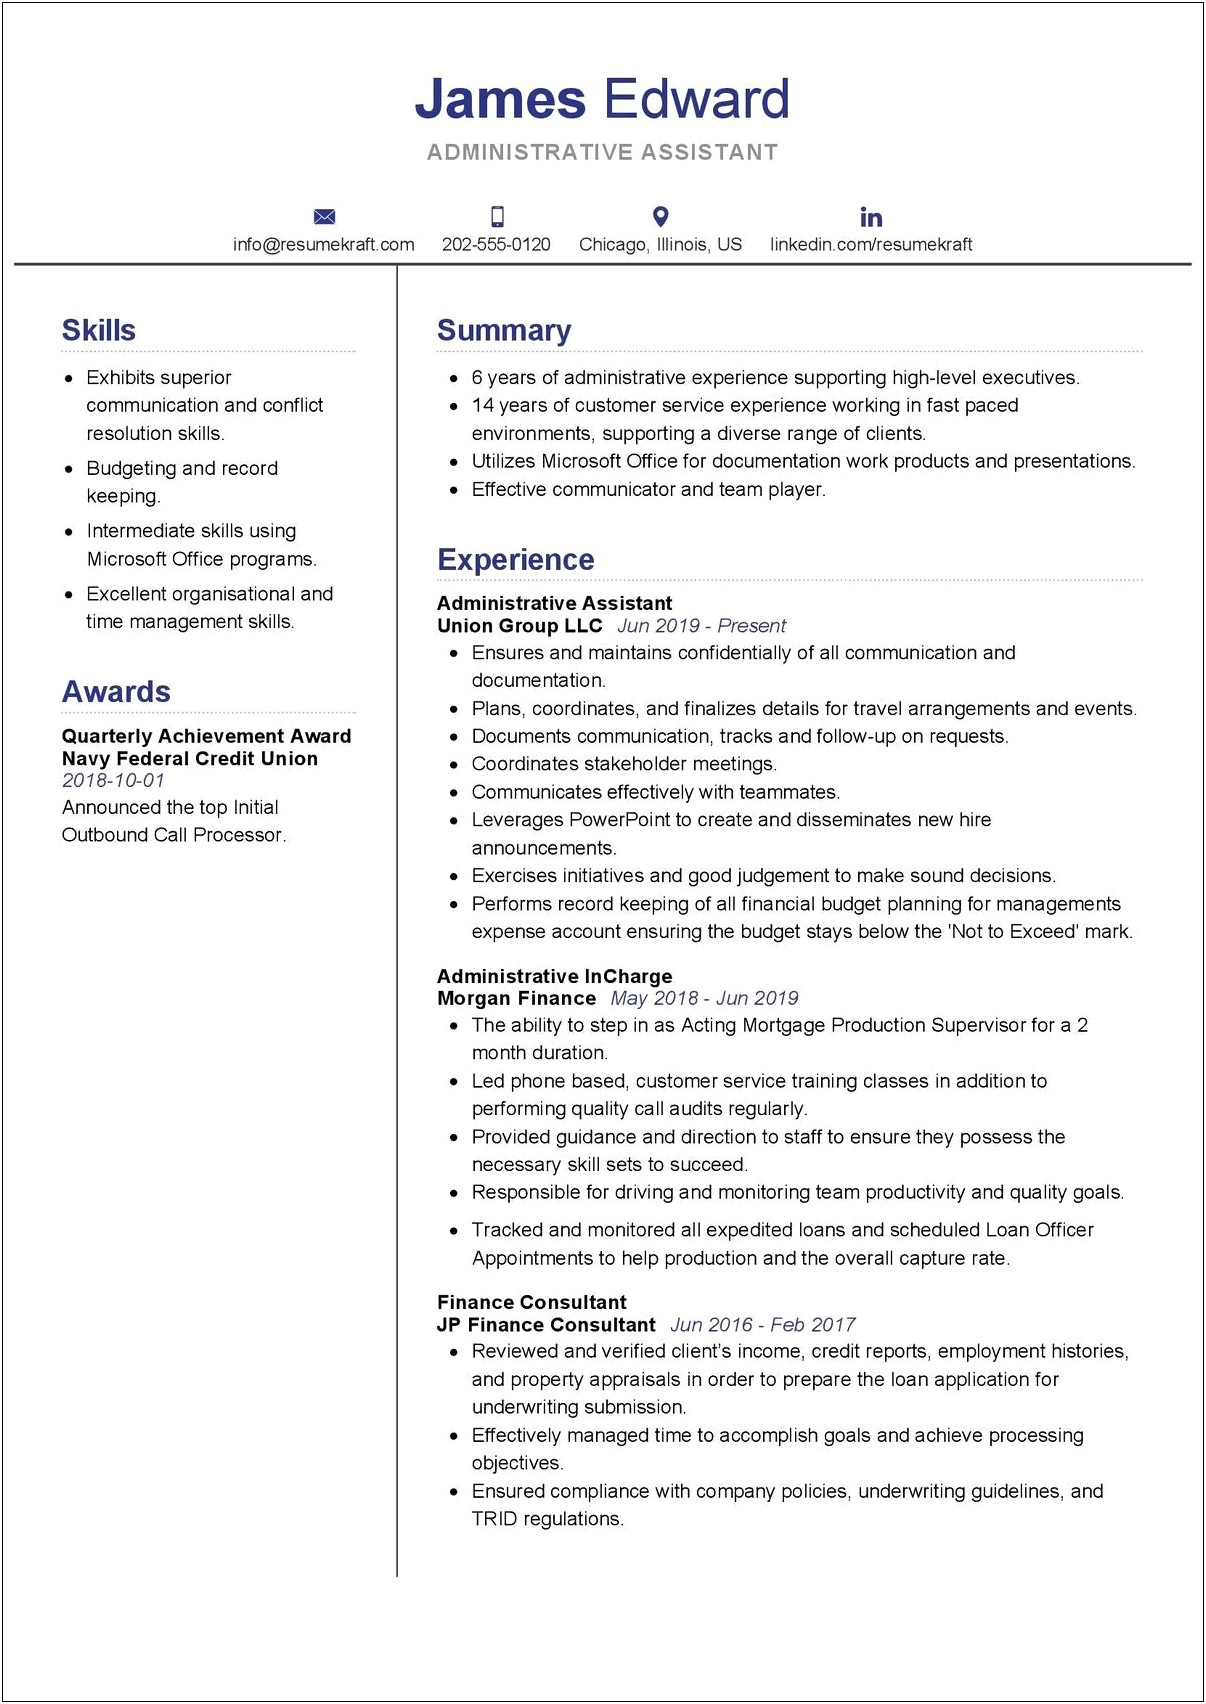 Skill Set Resume For Administrative Assistant